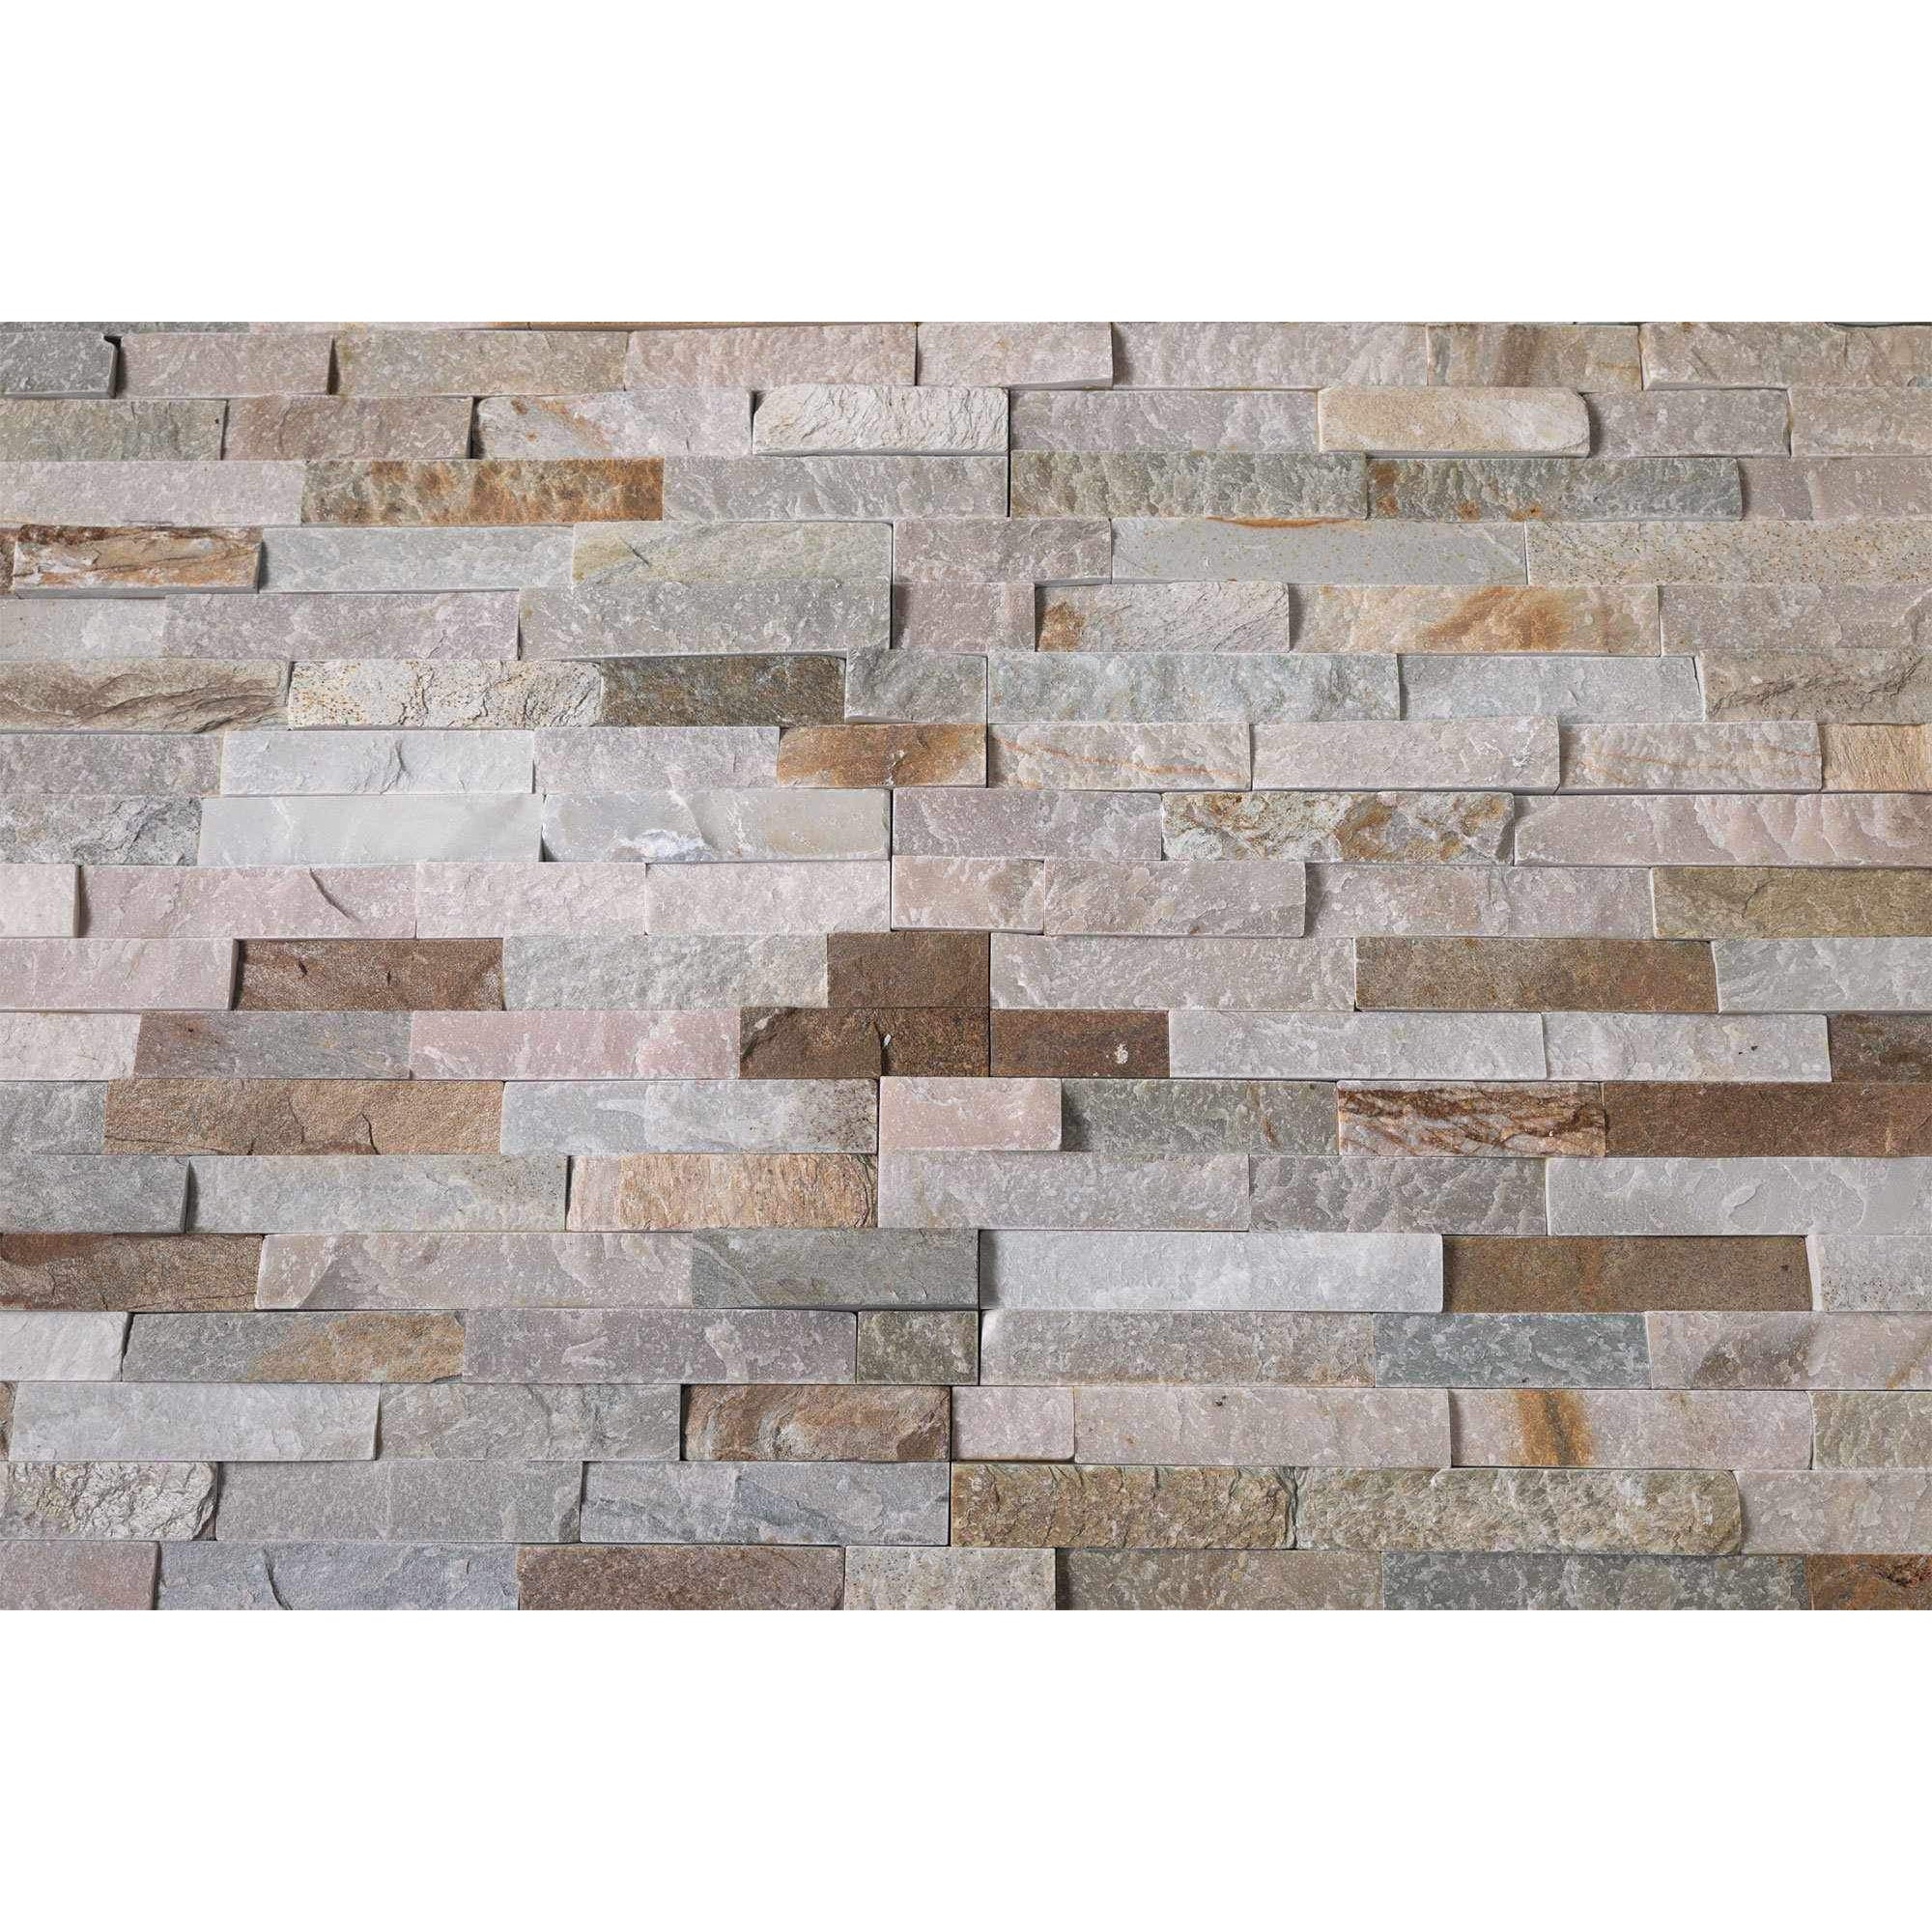 Natural Stacked Stone Wall Cladding Panels - Honey Oyster